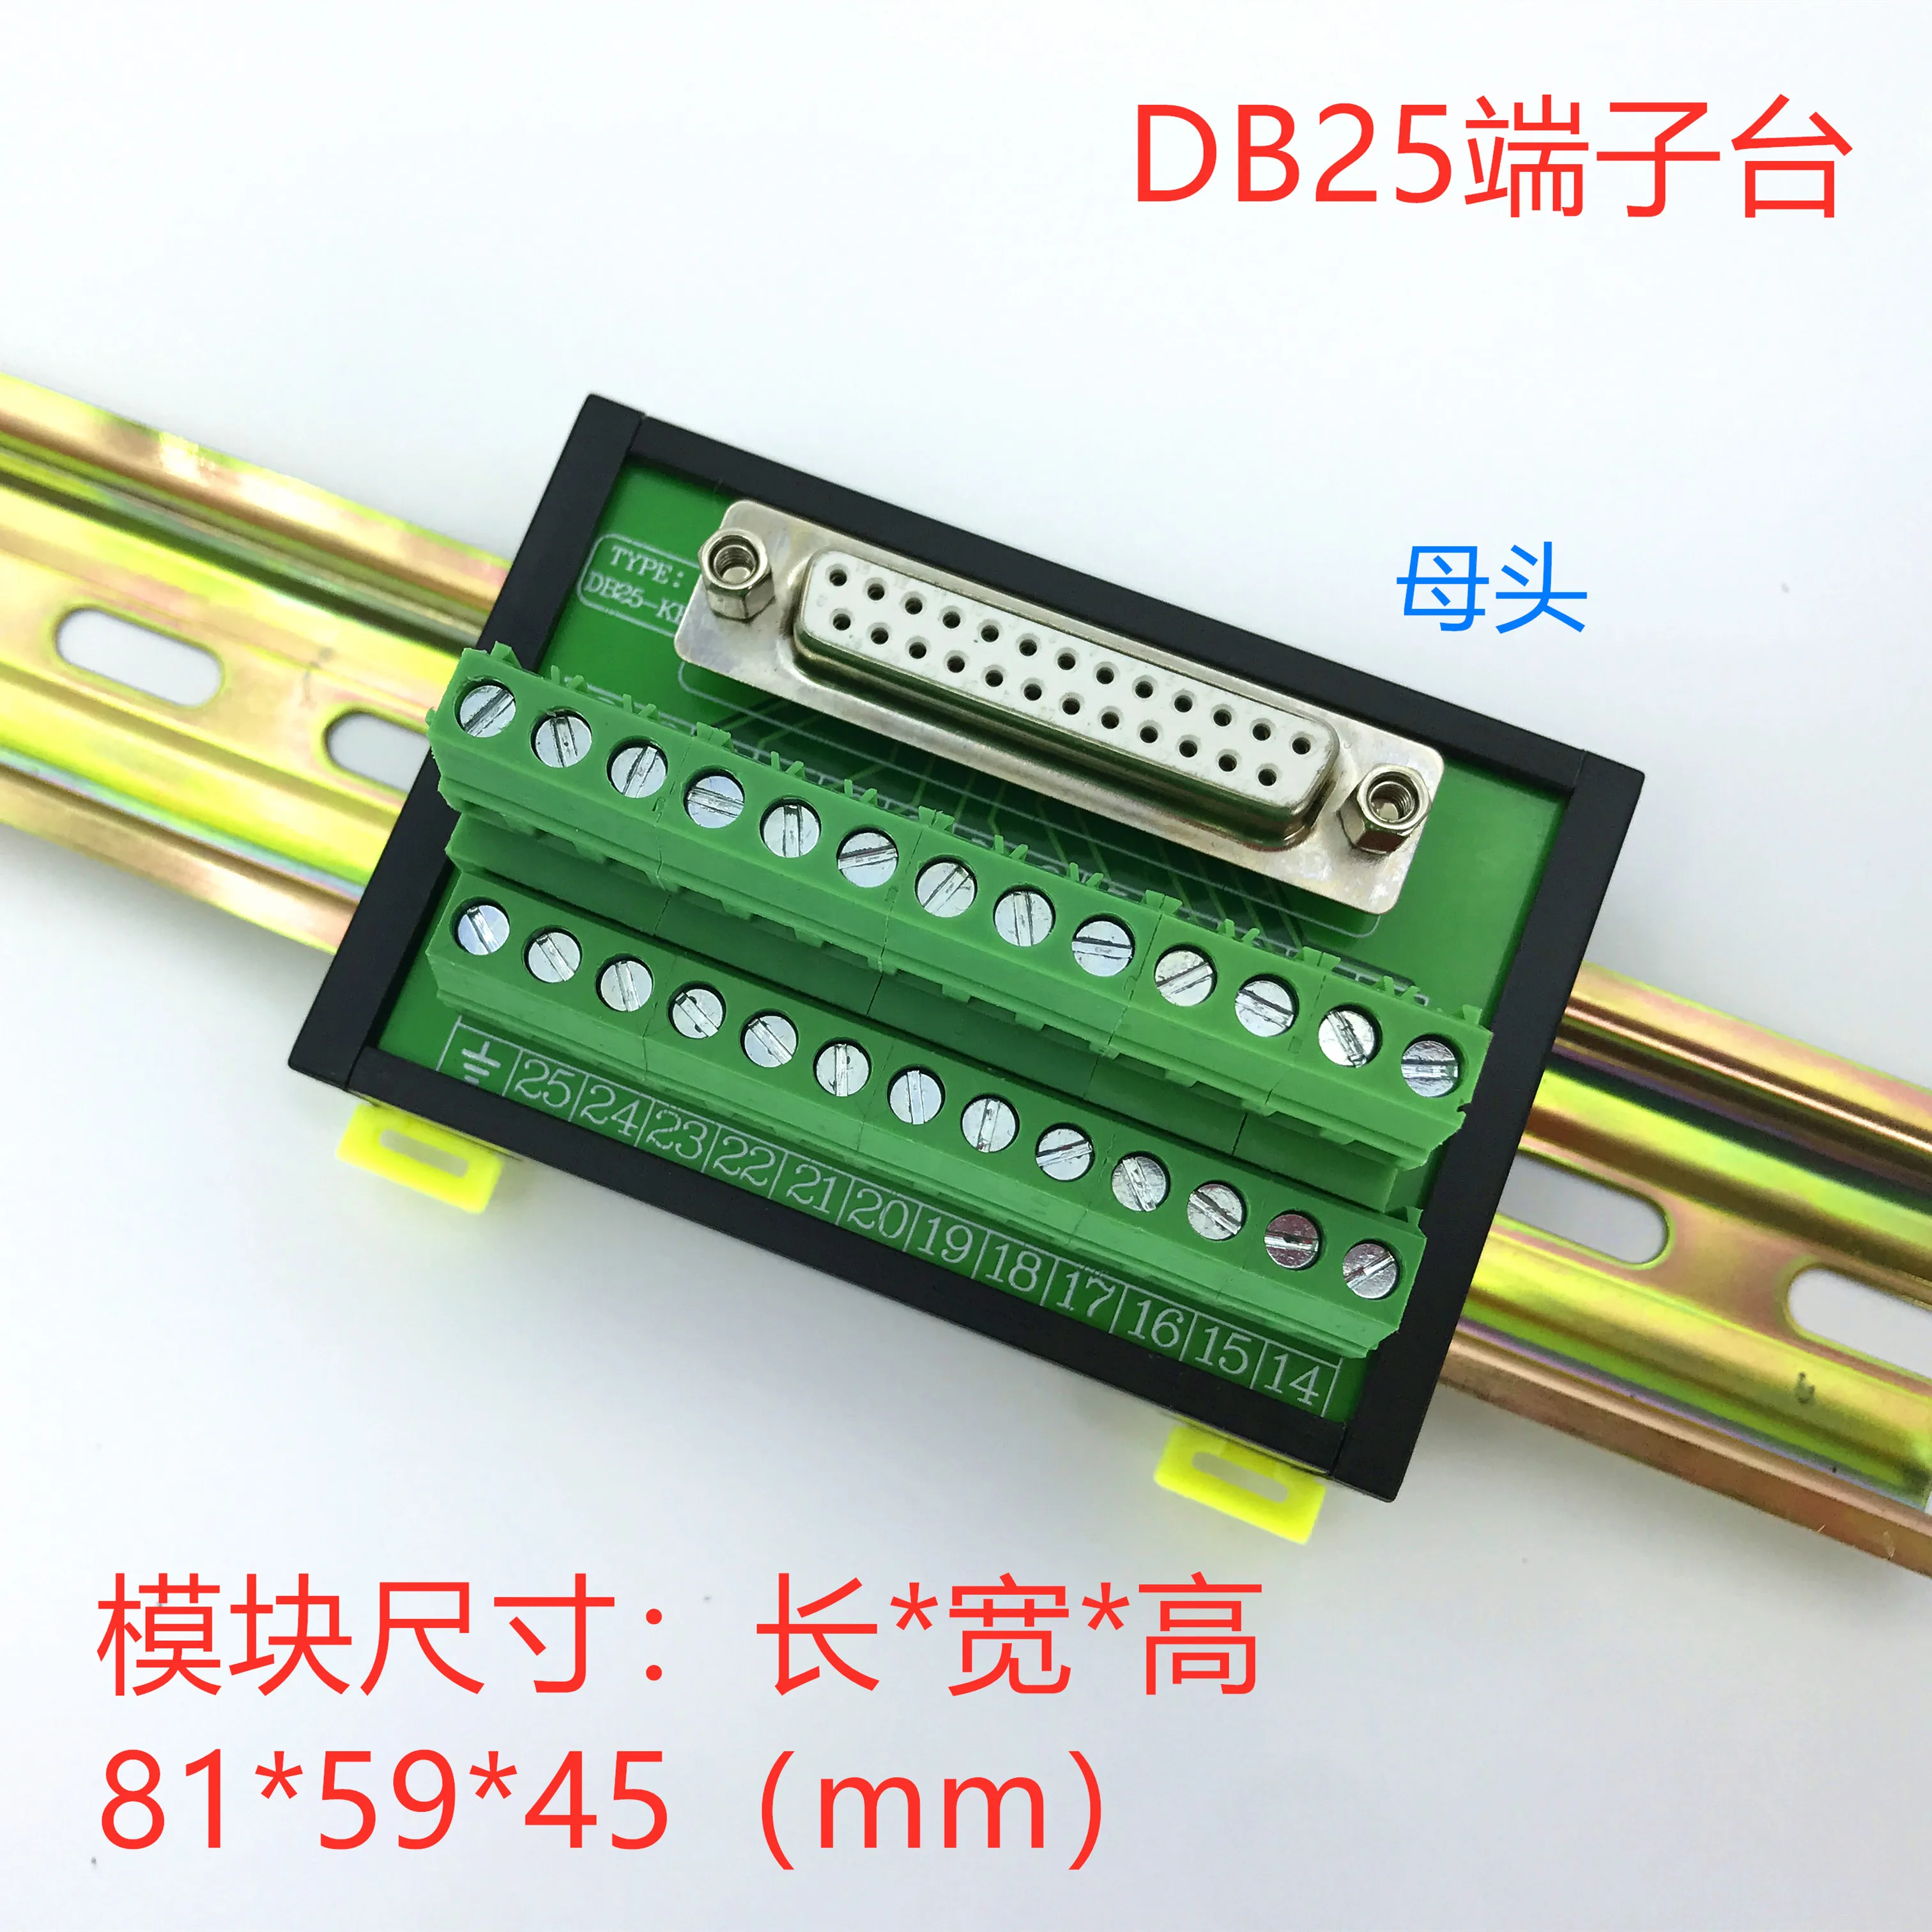 

DB25 serial-parallel port terminal adapter board male and female head DR25 solder-free module relay terminal block ADAM3925